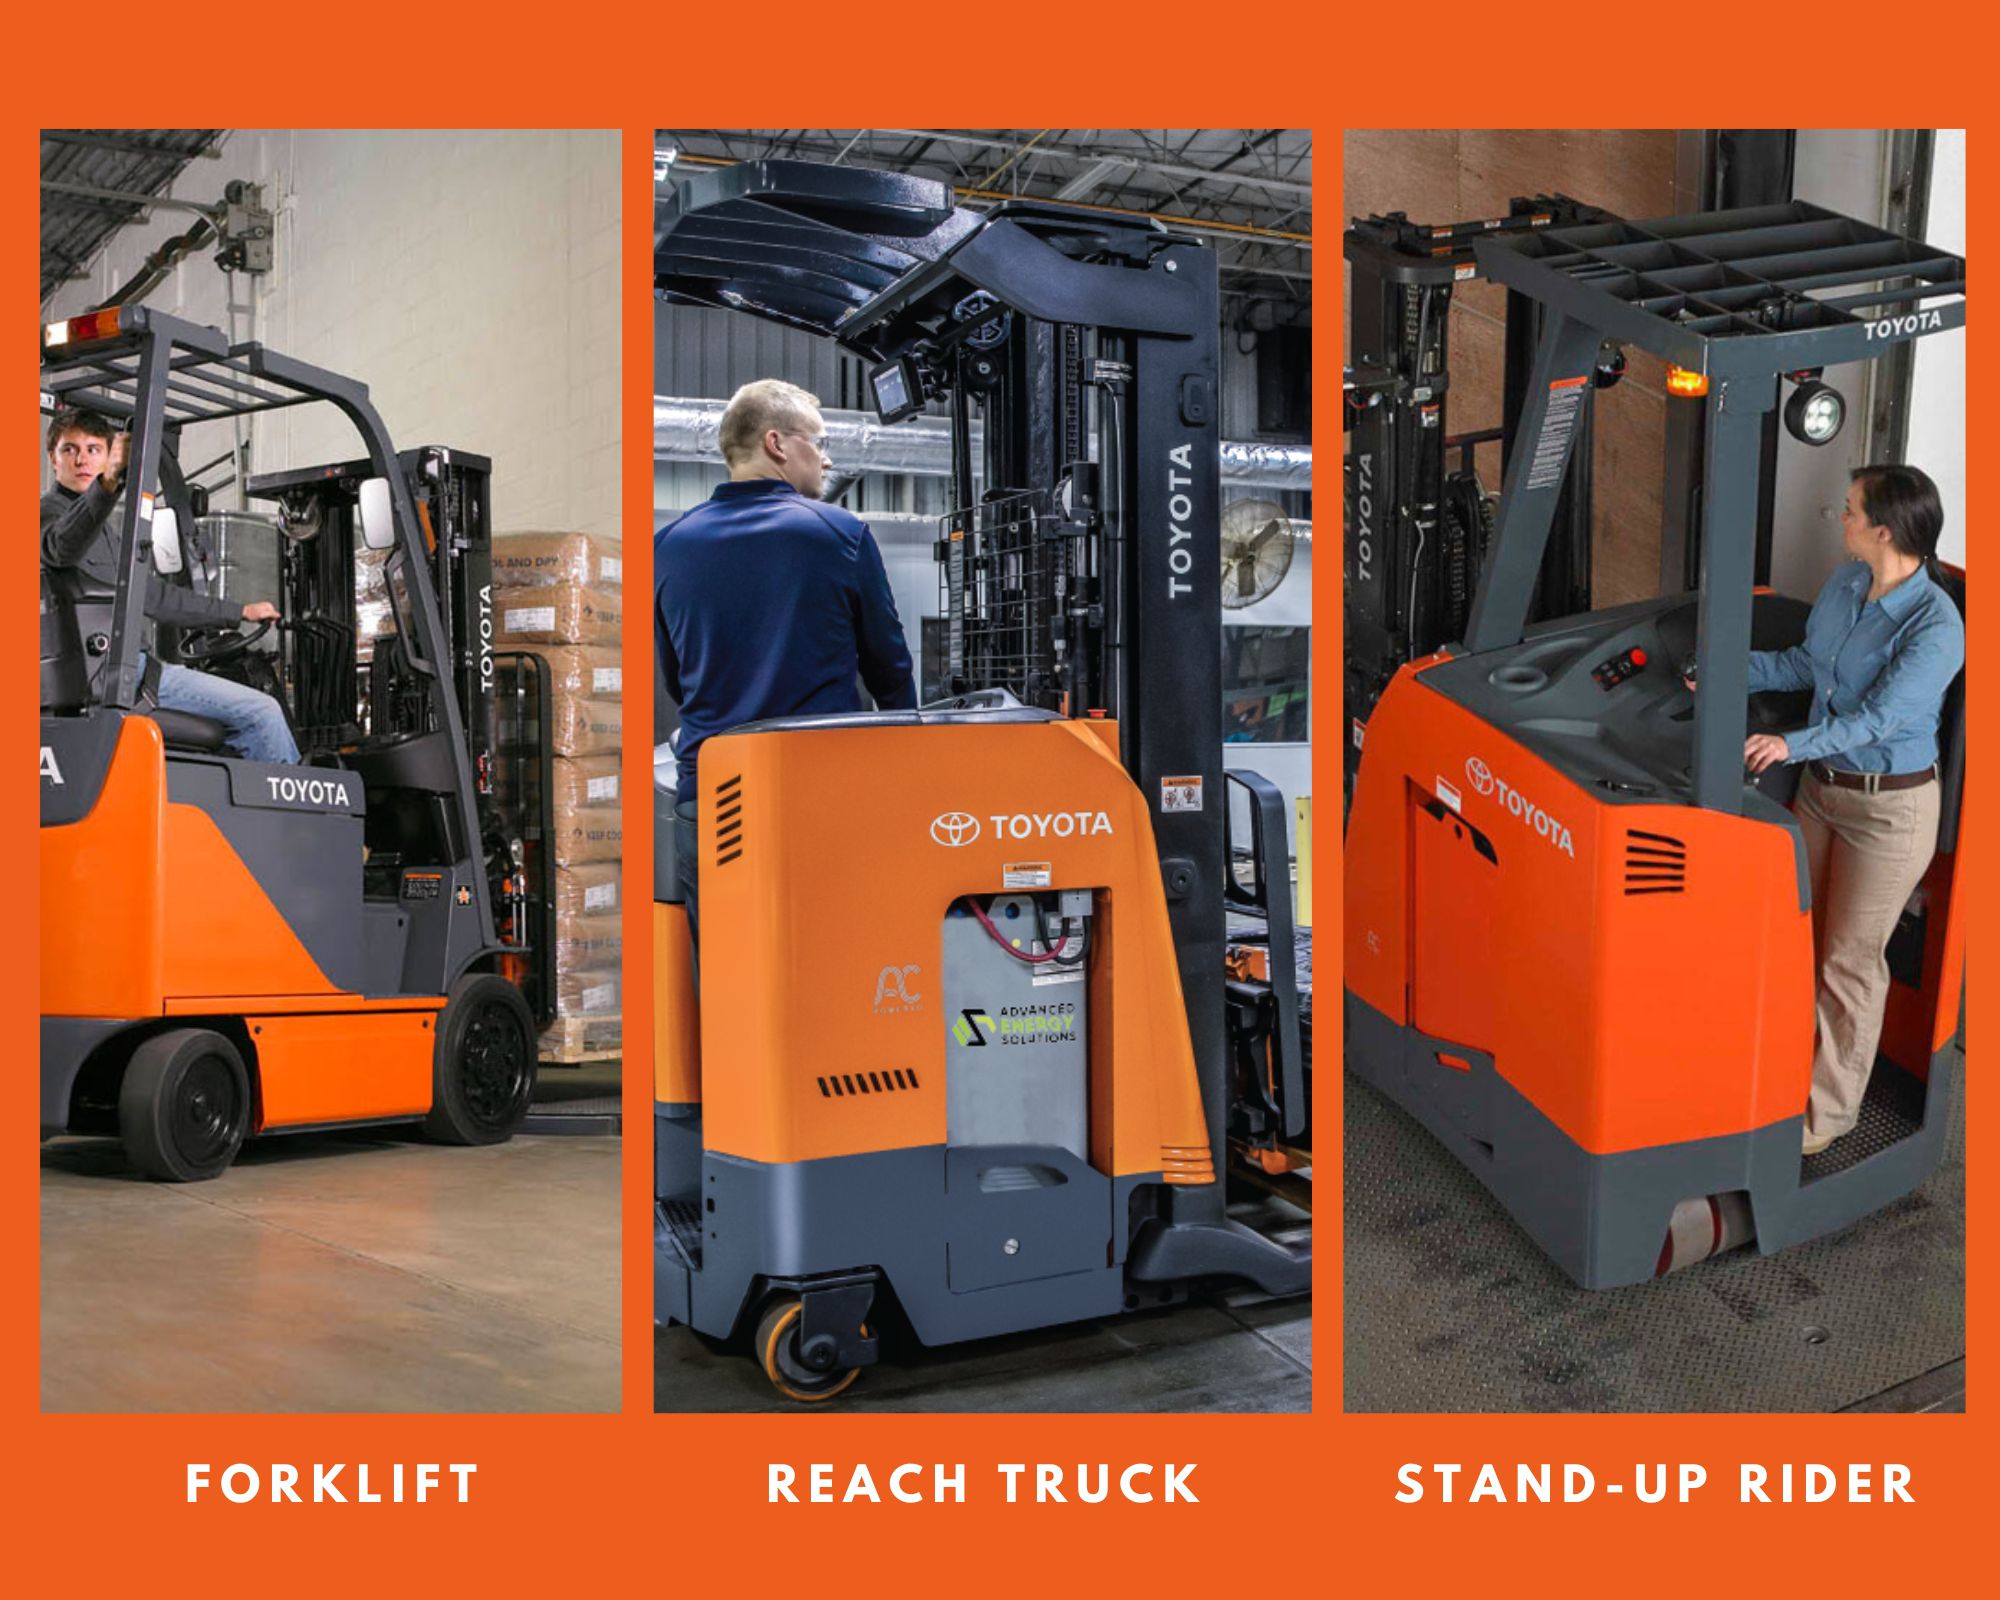 How To Determine What Forklift You Need